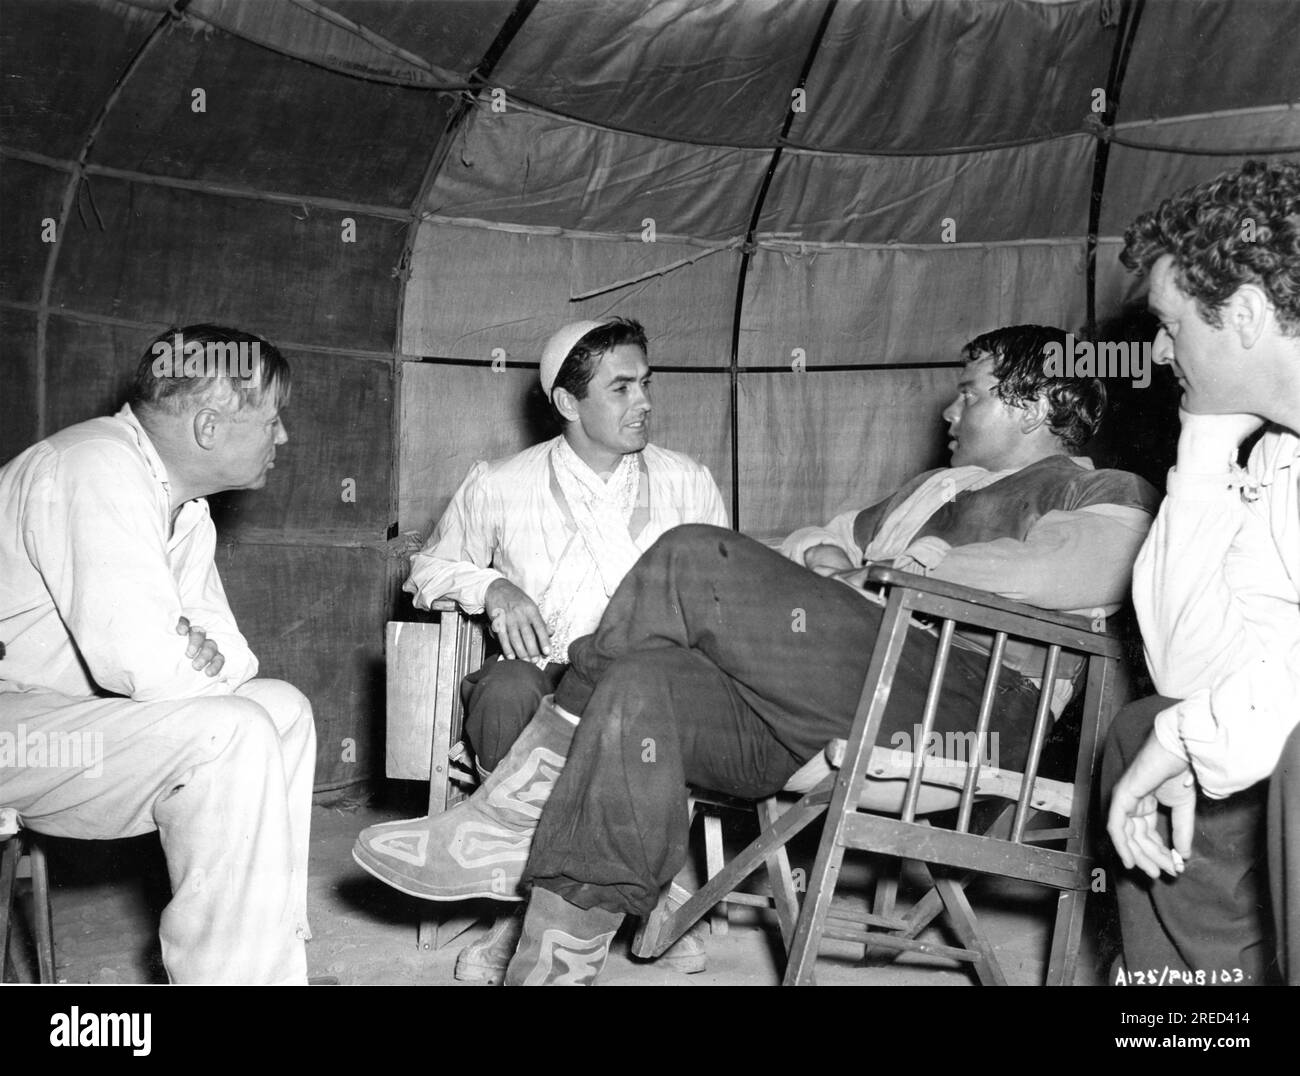 Director HENRY HATHAWAY TYRONE POER ORSON WELLES and JACK HAWKINS on set location candid in tent in Morocco during filming of THE BLACK ROSE 1950 director HENRY HATHAWAY novel Thomas B. Costain screenplay Talbot Jennings music Richard Addinsell cinematography Jack Cardiff costumes Michael Whittaker Twentieth Century Fox Stock Photo